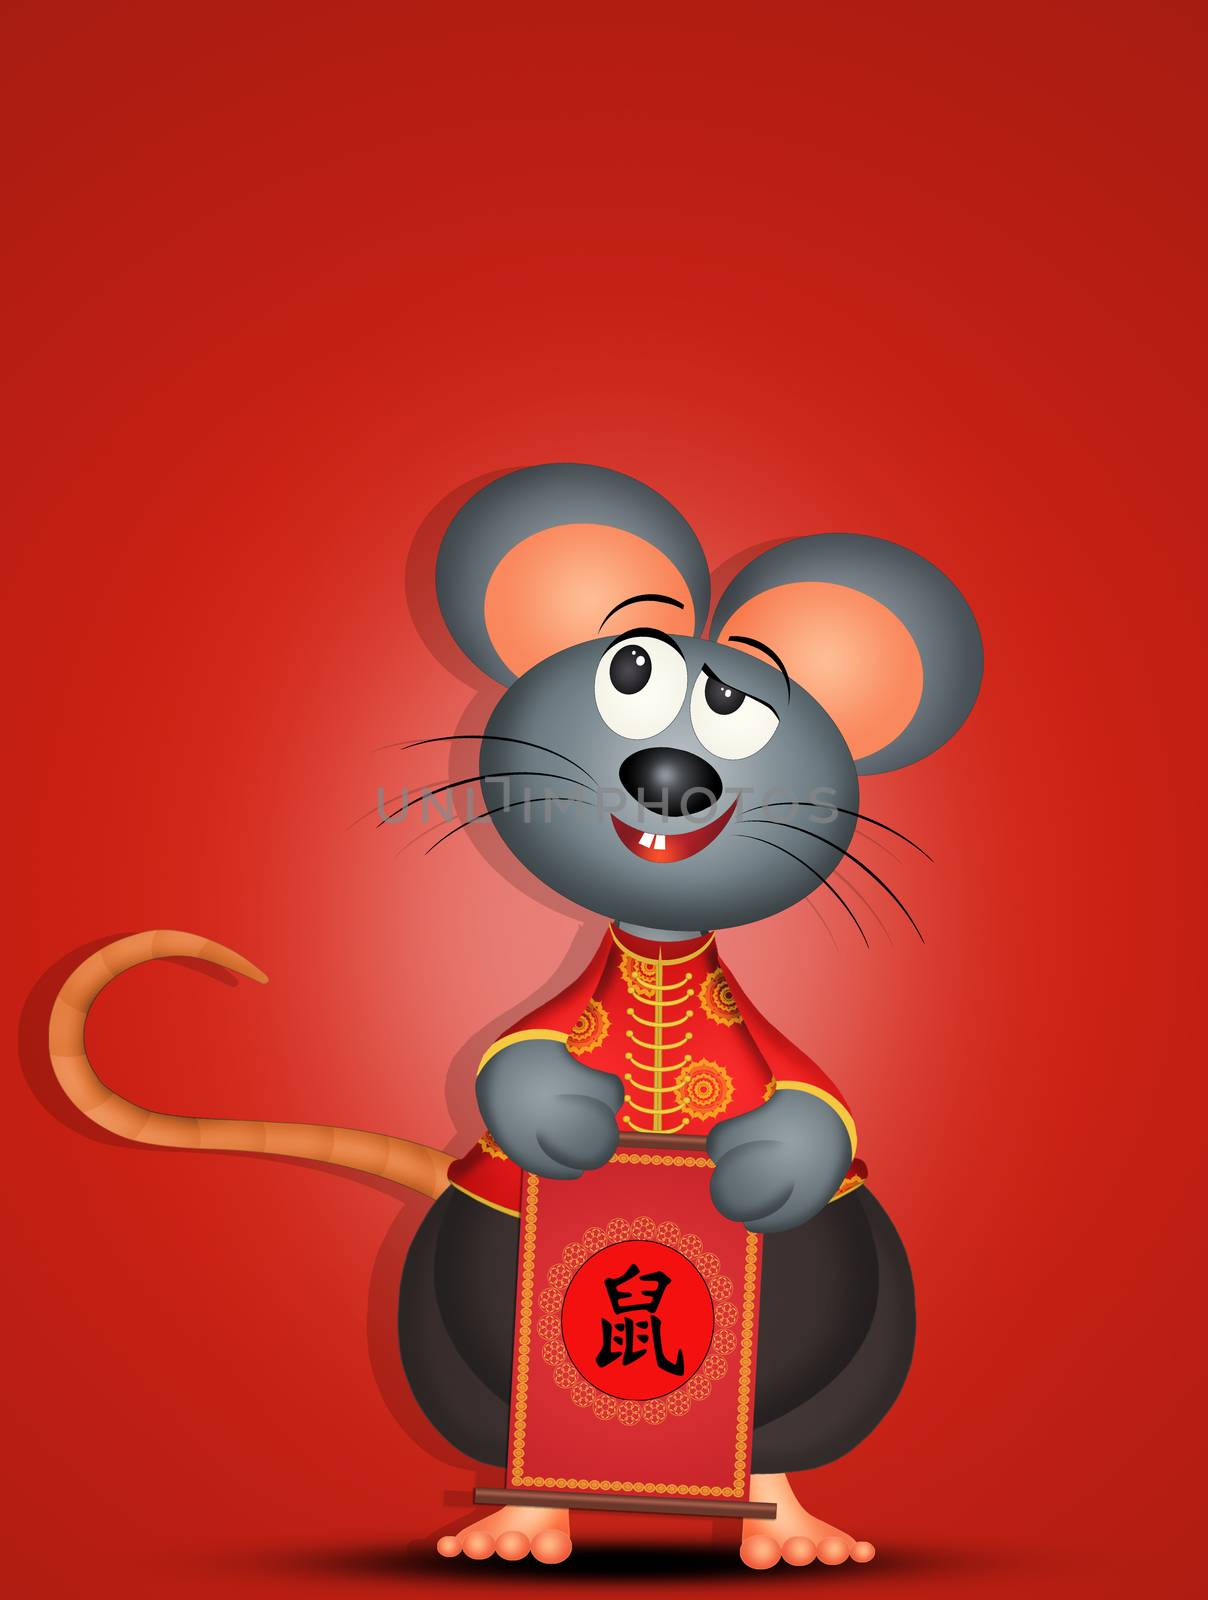 illustration of the year of the mouse in the Chinese calendar